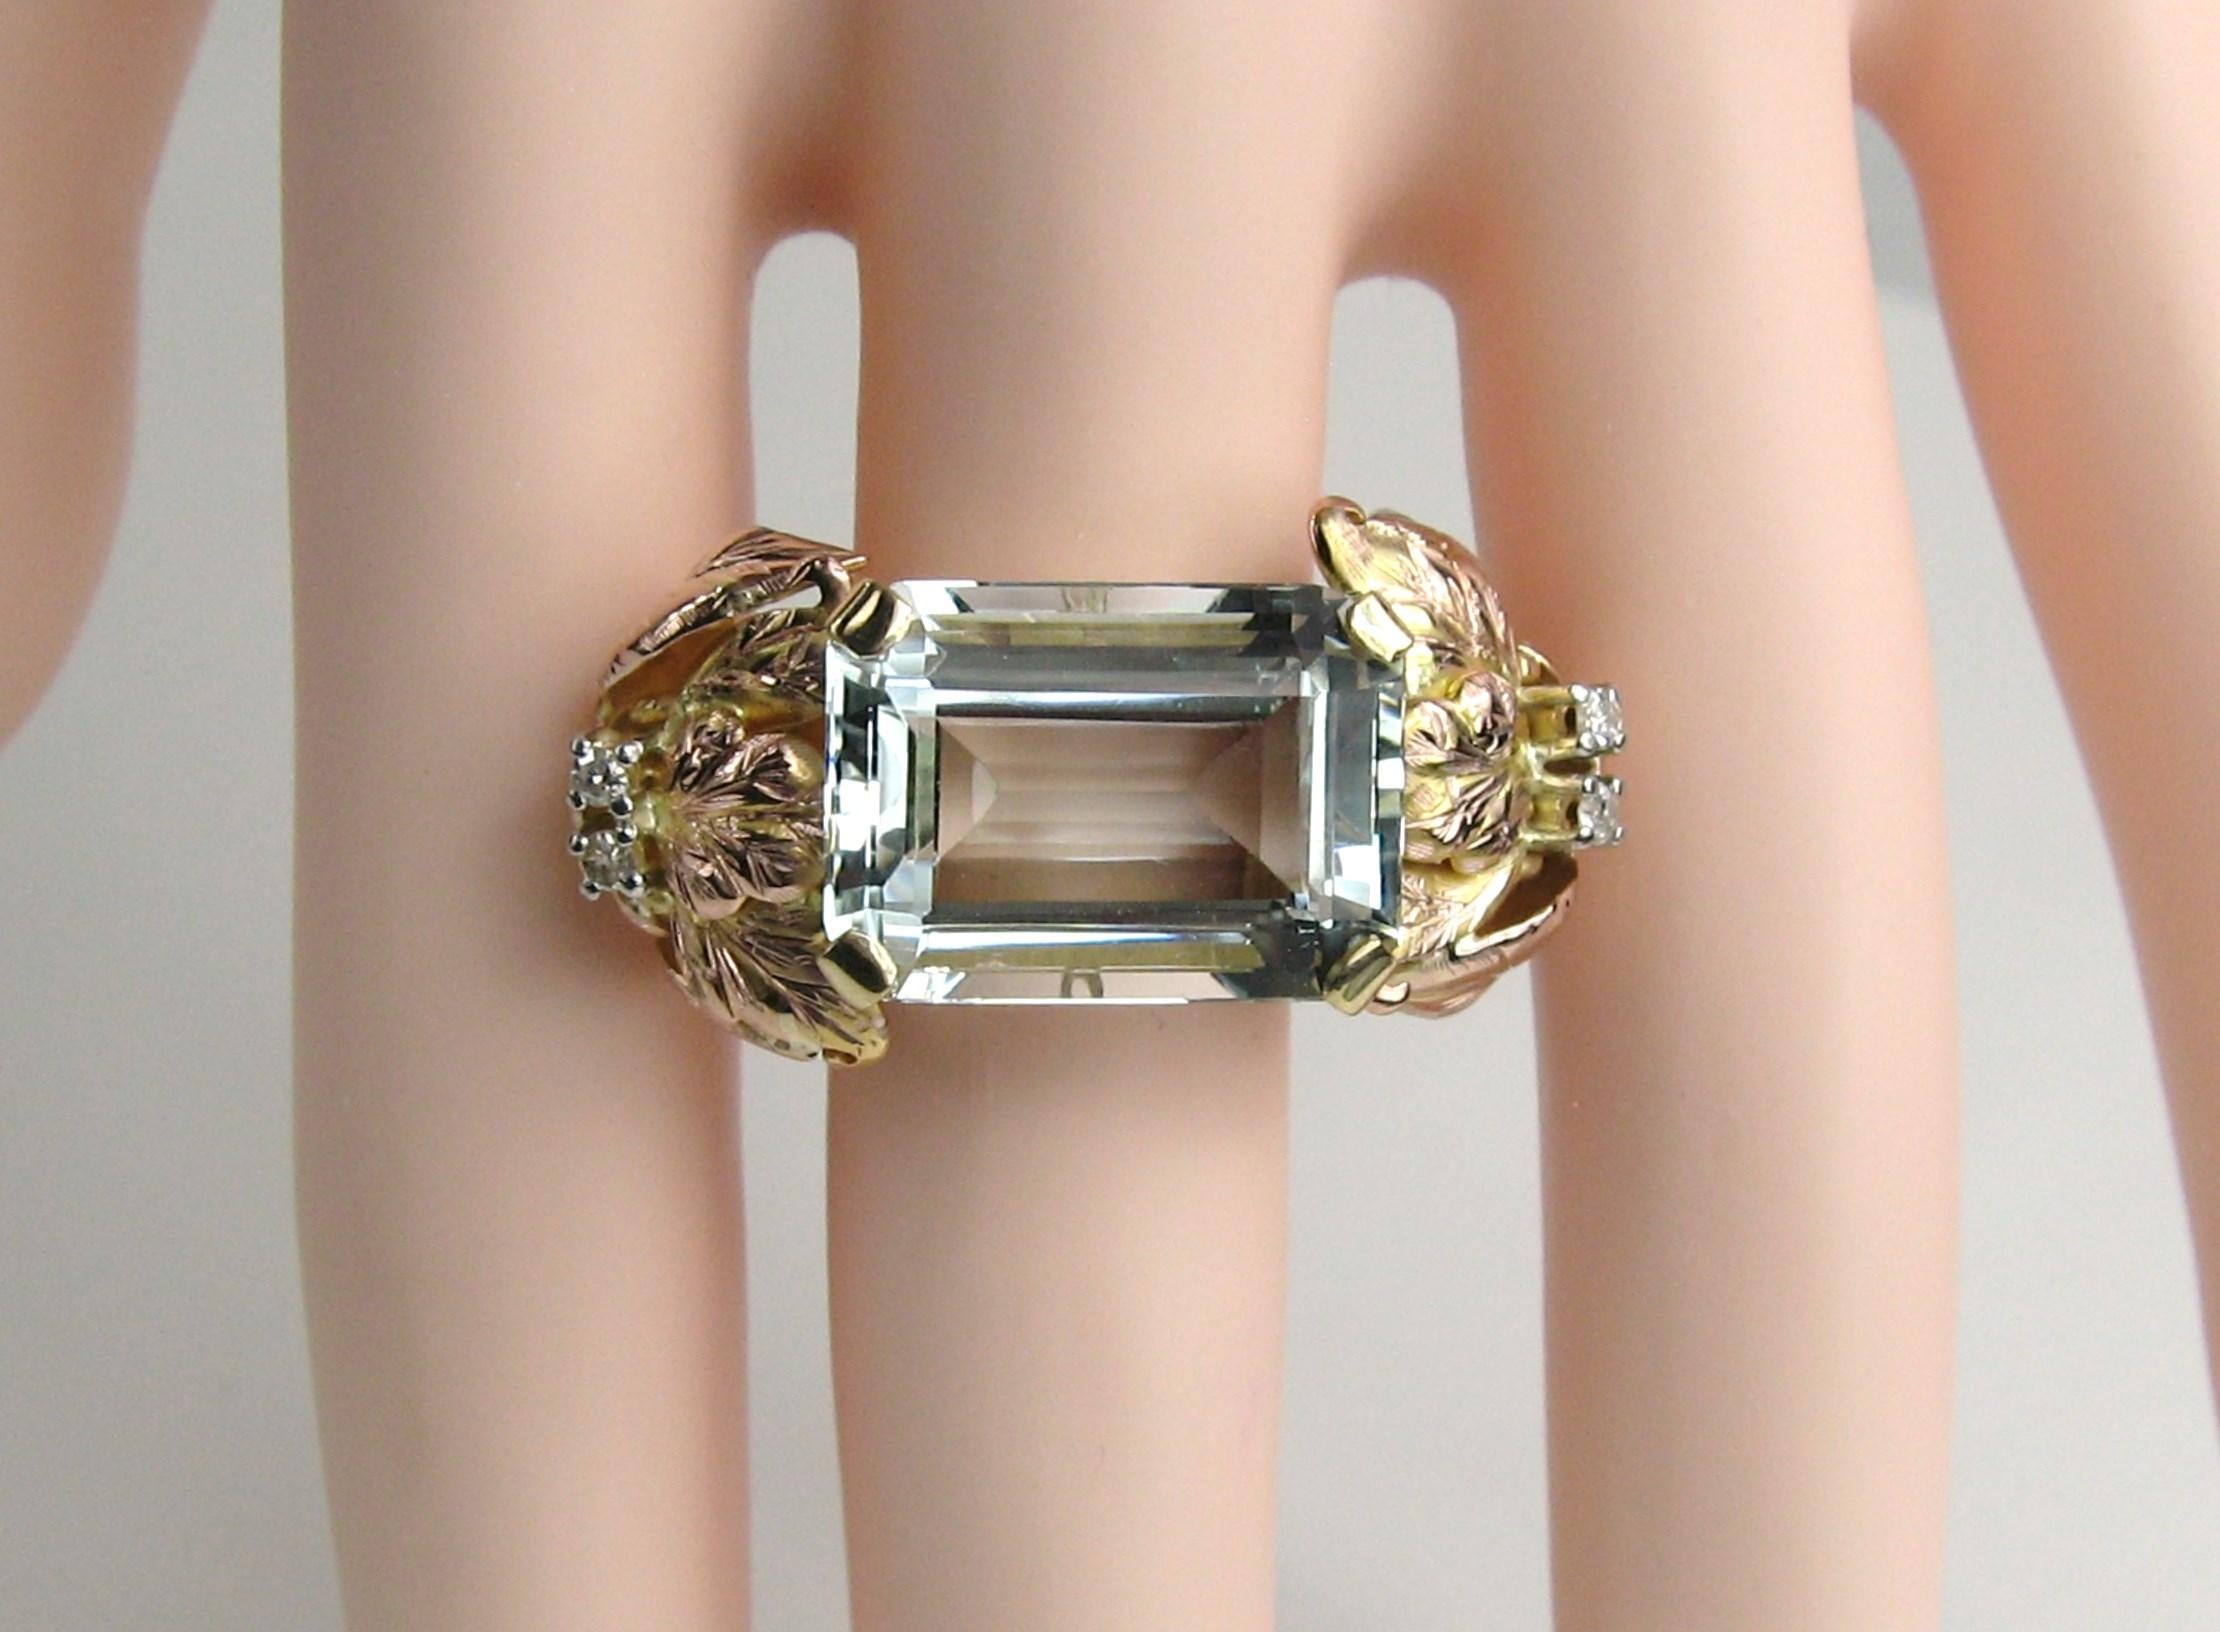 14 Karat Gold 13.75 Carat Emerald Cut Aquamarine Diamond Cocktail Ring In Good Condition For Sale In Wallkill, NY